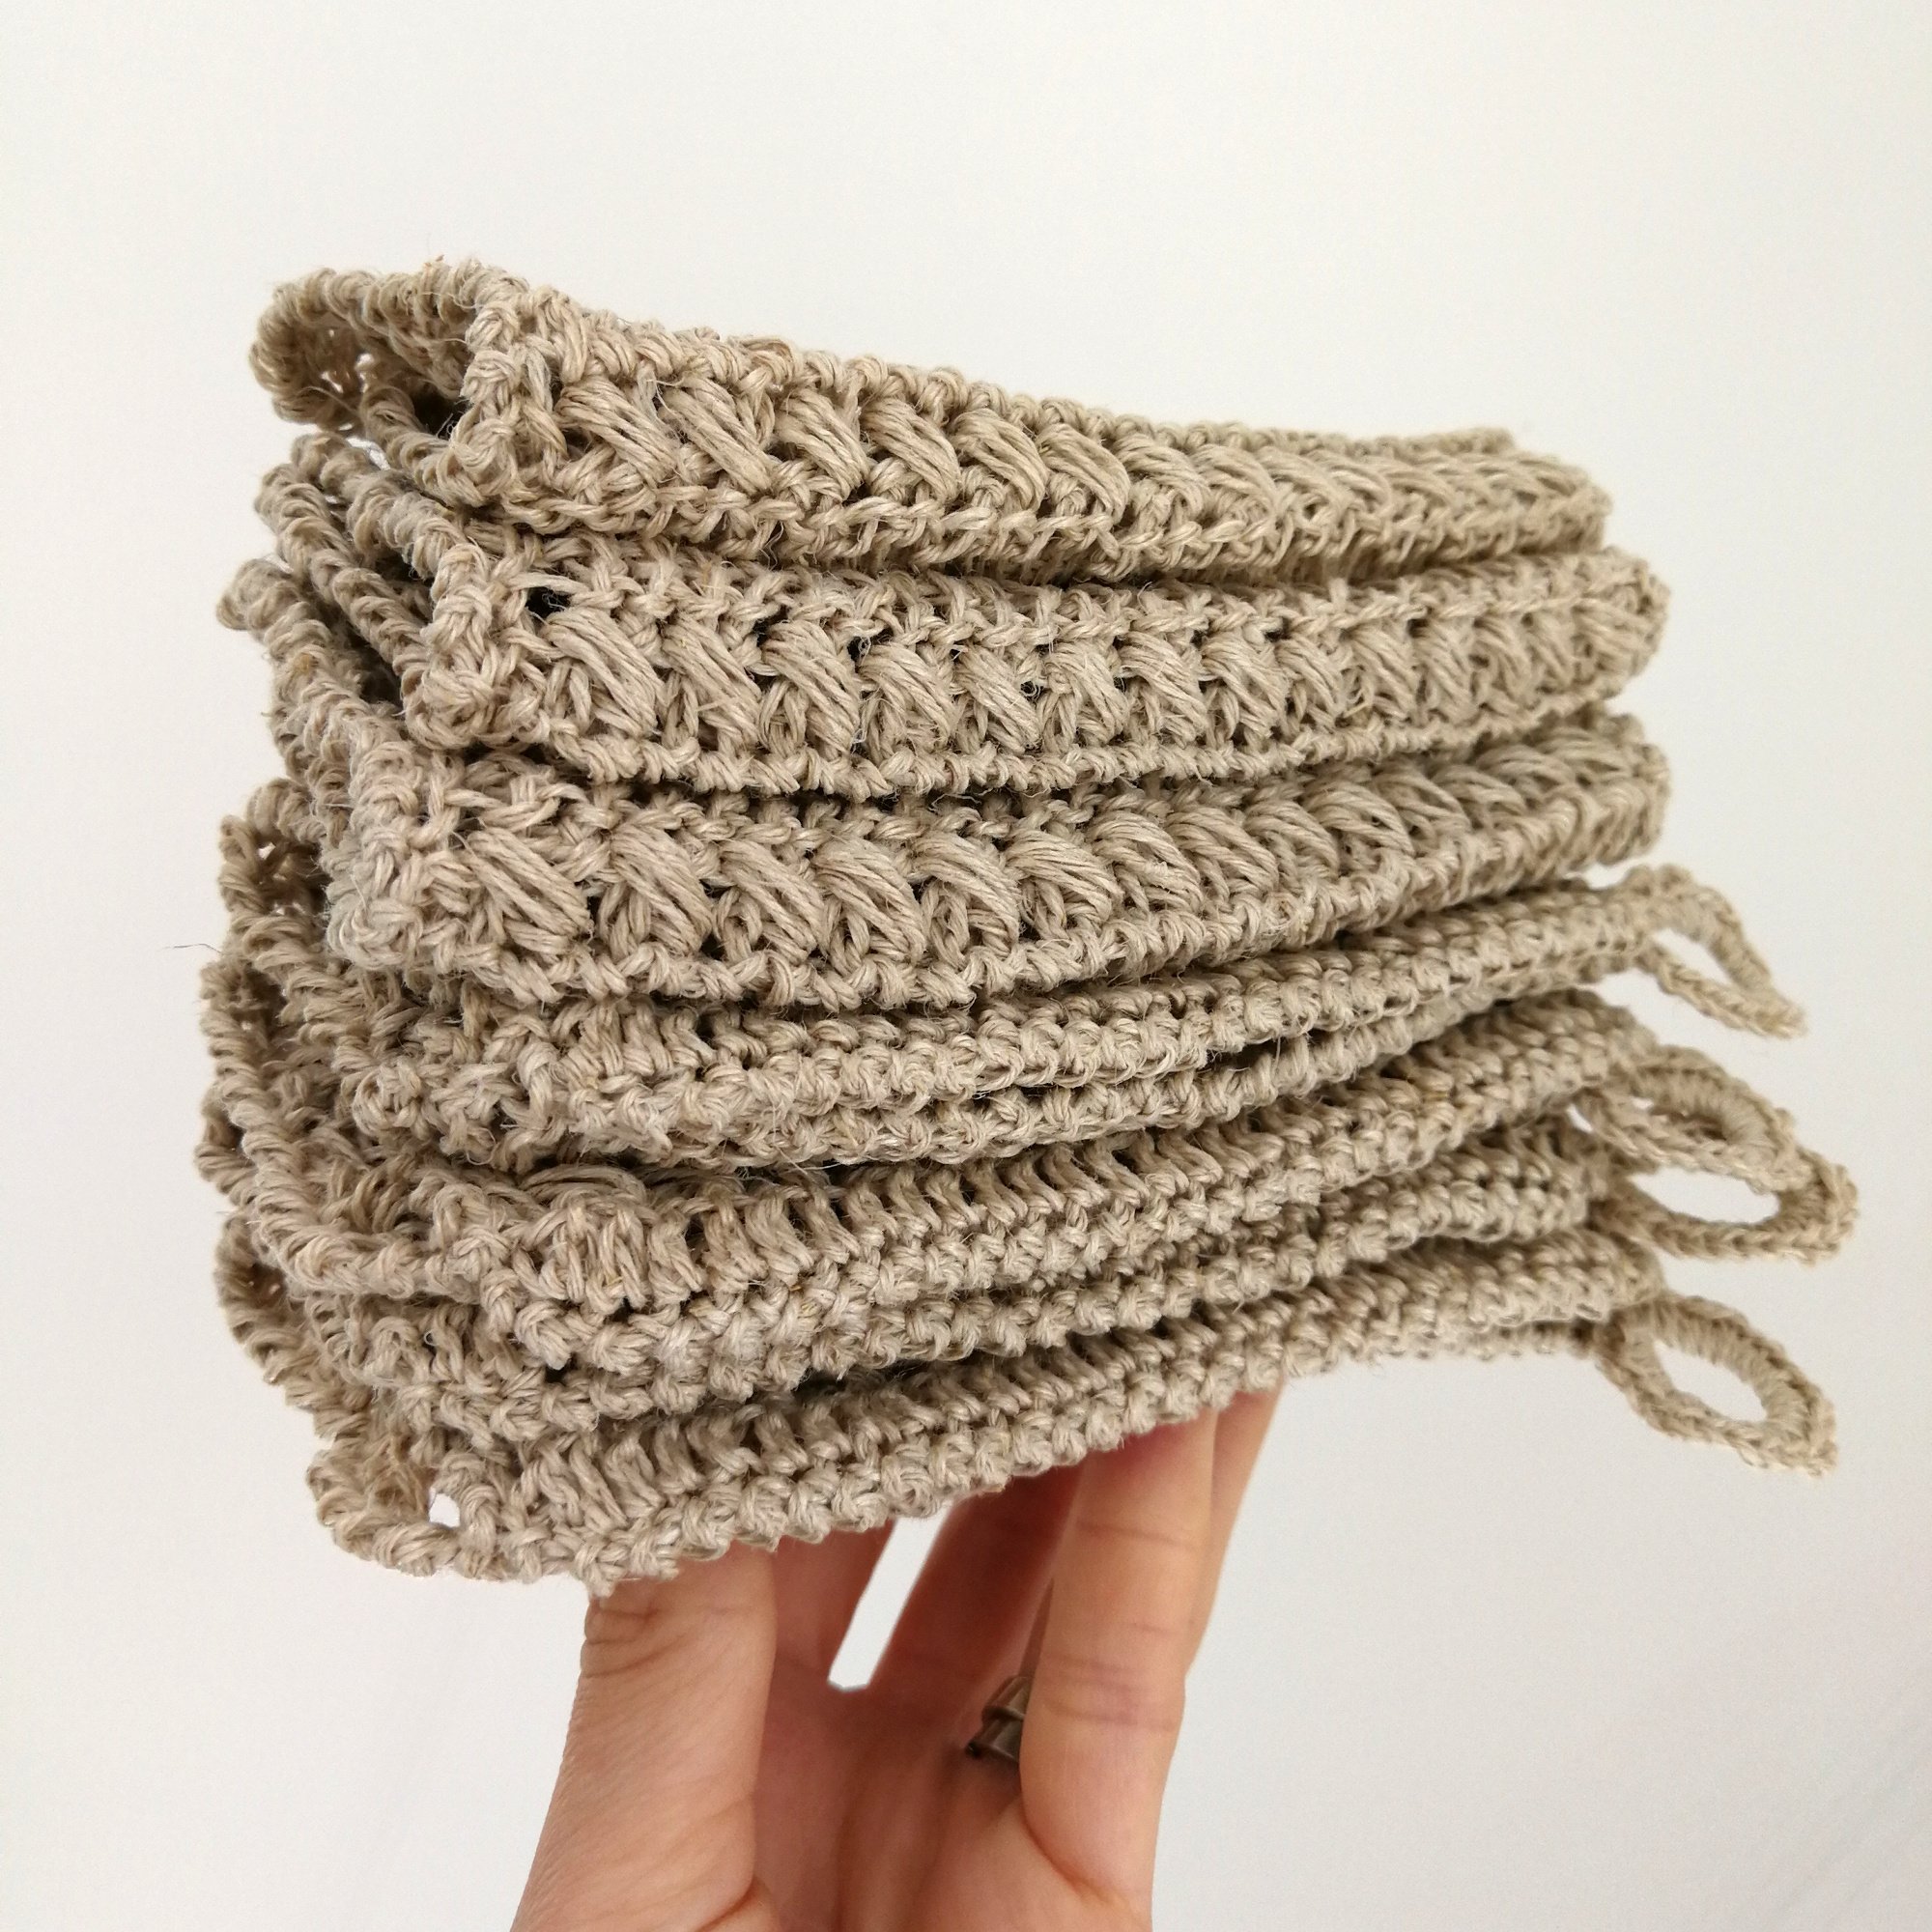 A square, textured dishcloth made with using the crochet pattern is laid out on a white table in a diamond shape. There are alternating rows of textured stitches and a textured border.